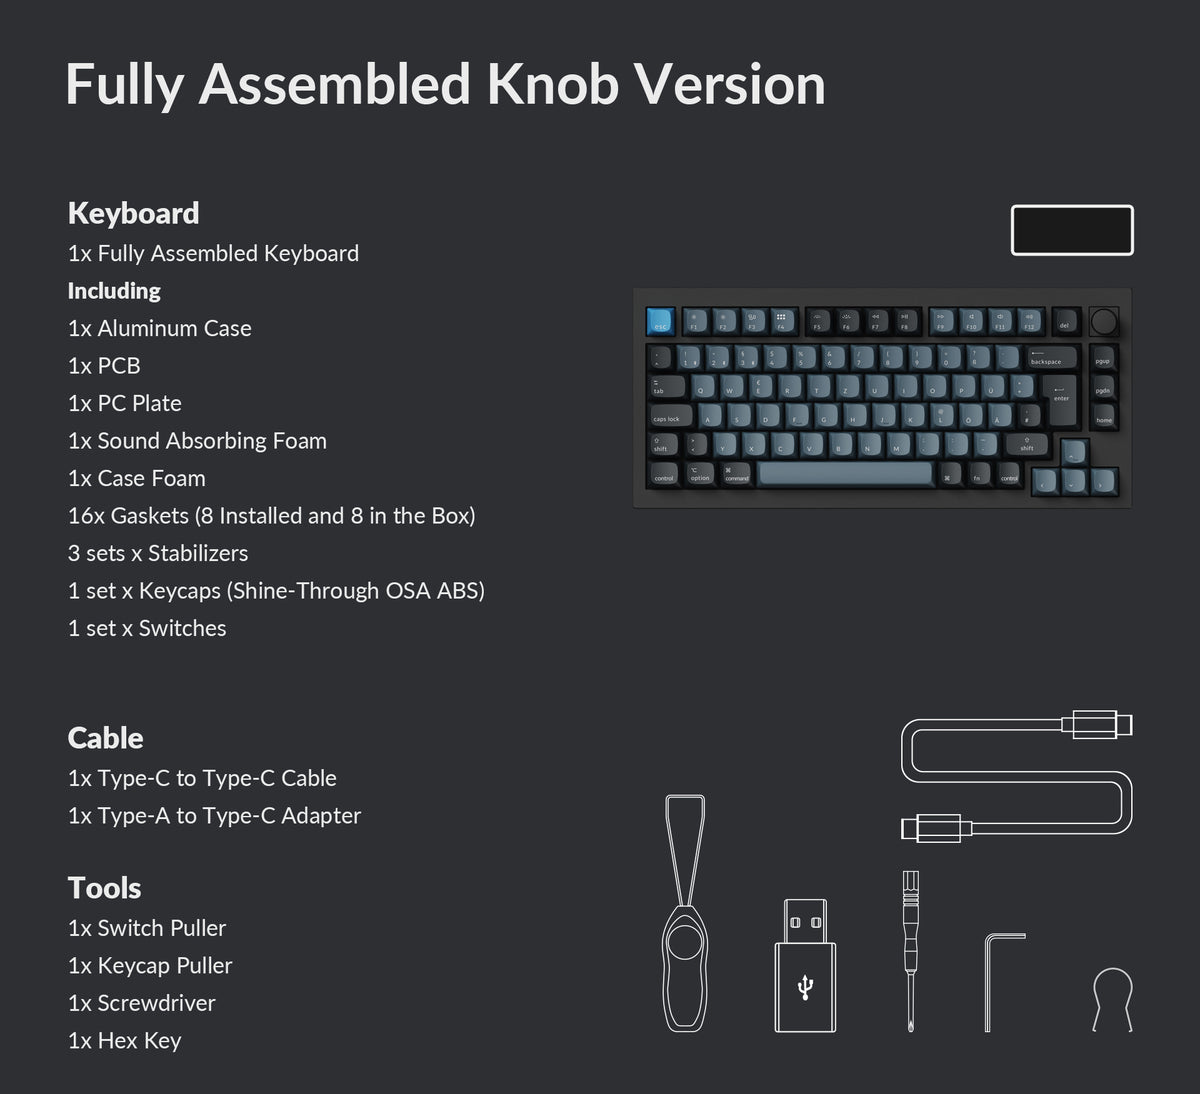 Package list of Keychron Q1 Pro ISO layout QMK/VIA 75% layout wireless custom mechanical keyboard fully assembled knob version